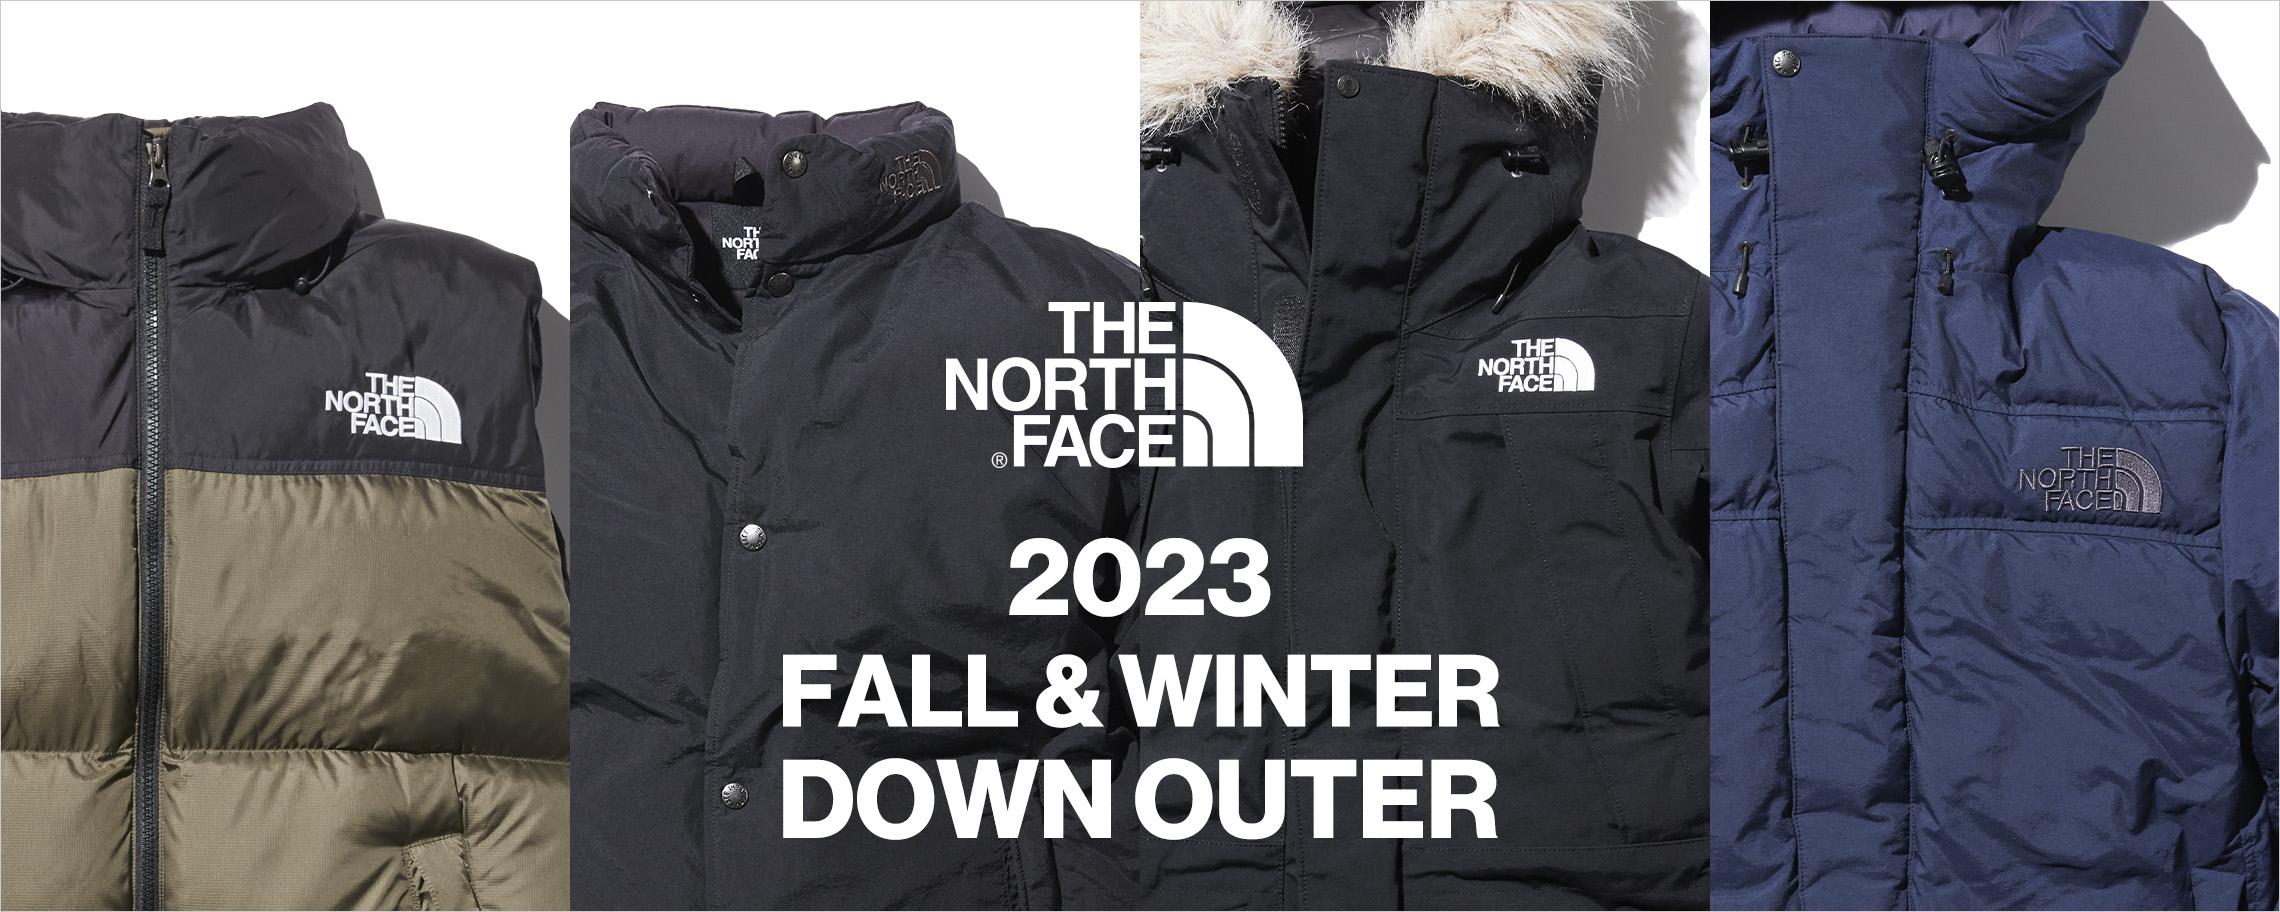 THE NORTH FACE 23FW DOWN OUTER